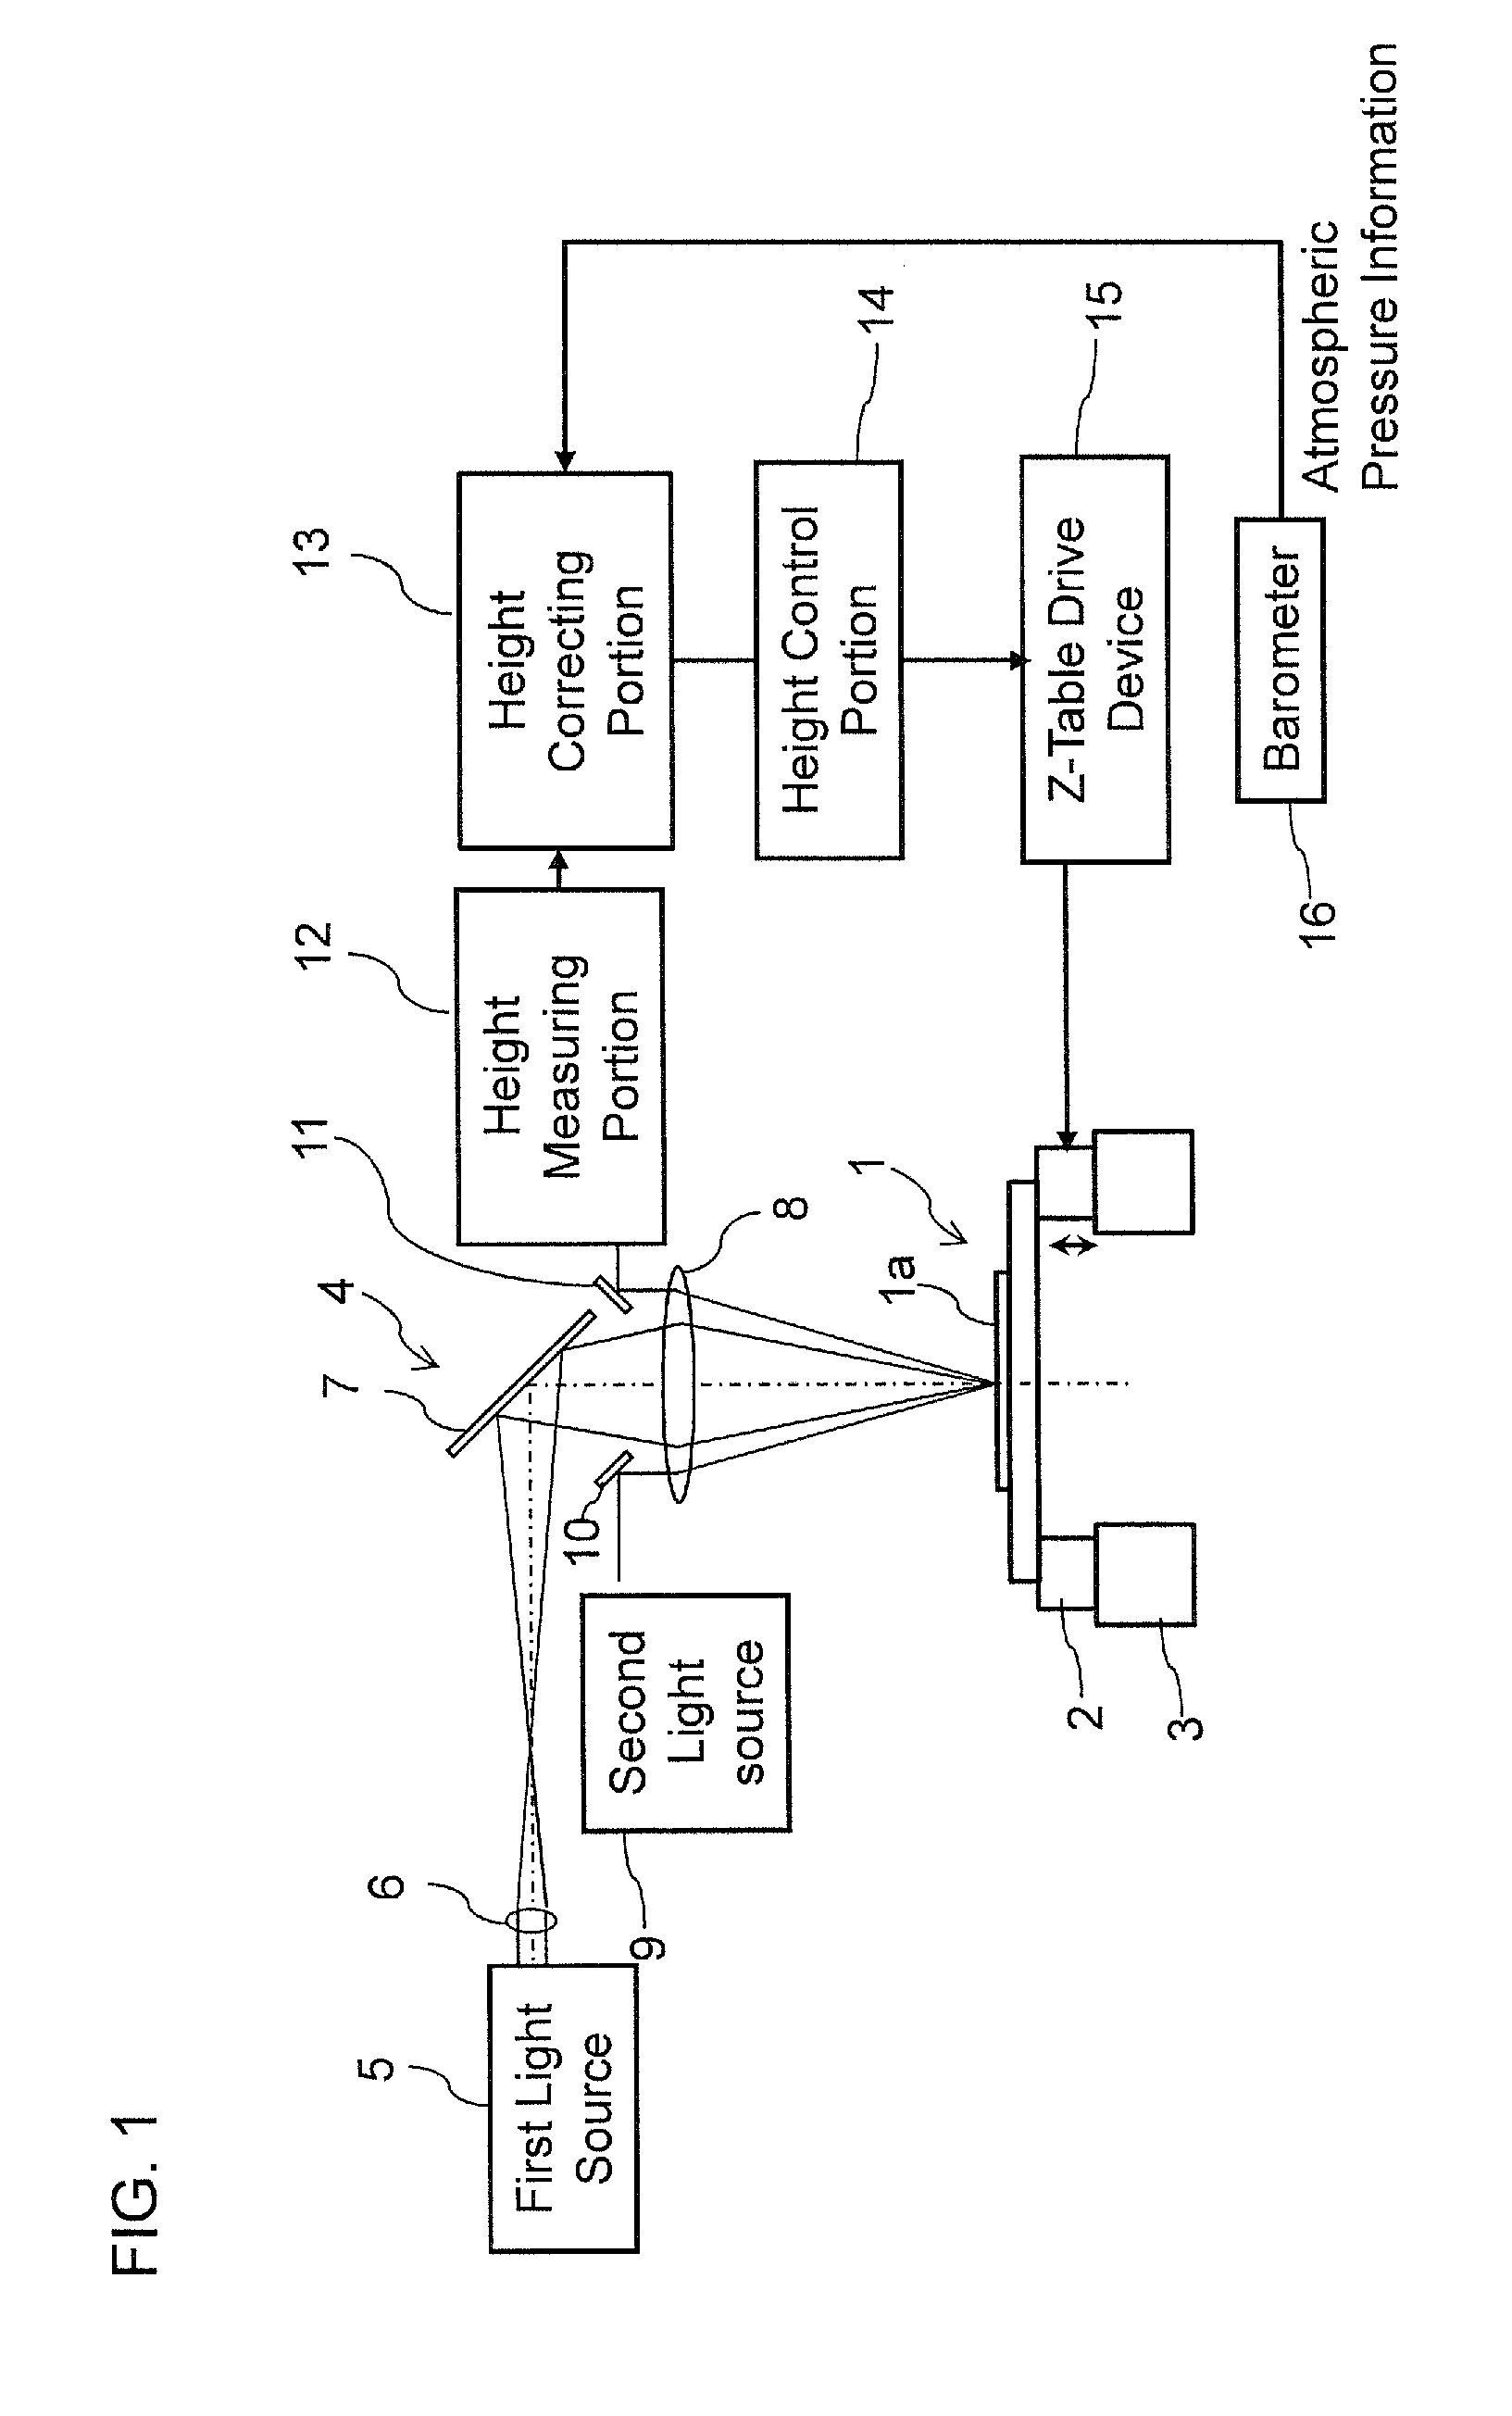 Inspection method and system